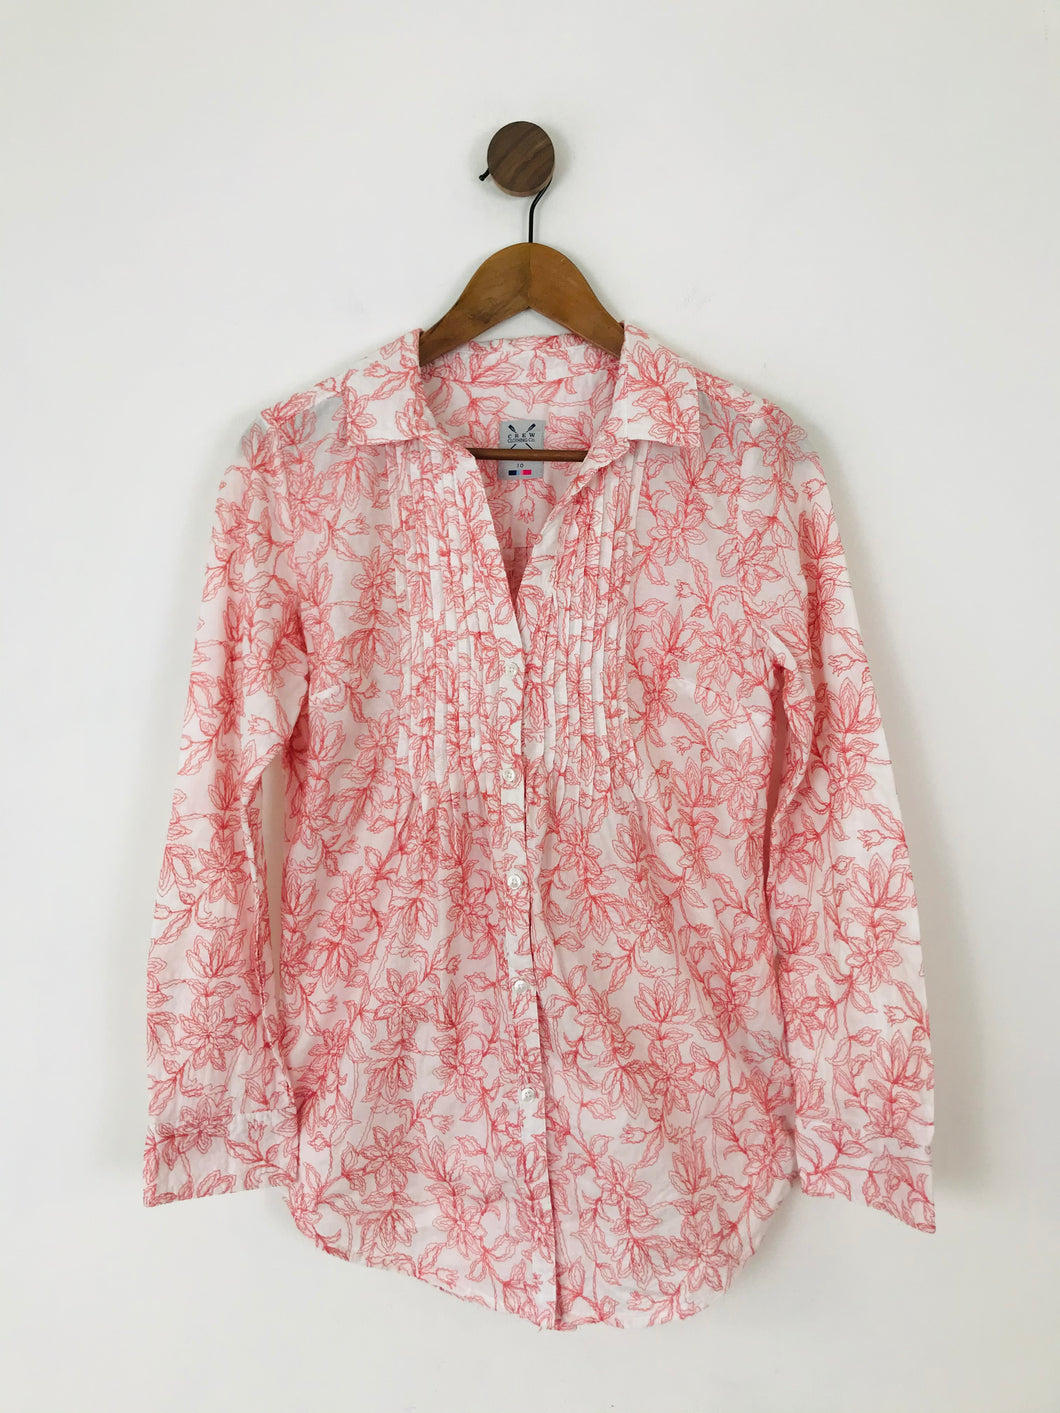 Crew Clothing Women’s Floral Embroidered Long Sleeve Shirt | UK10 | White Pink